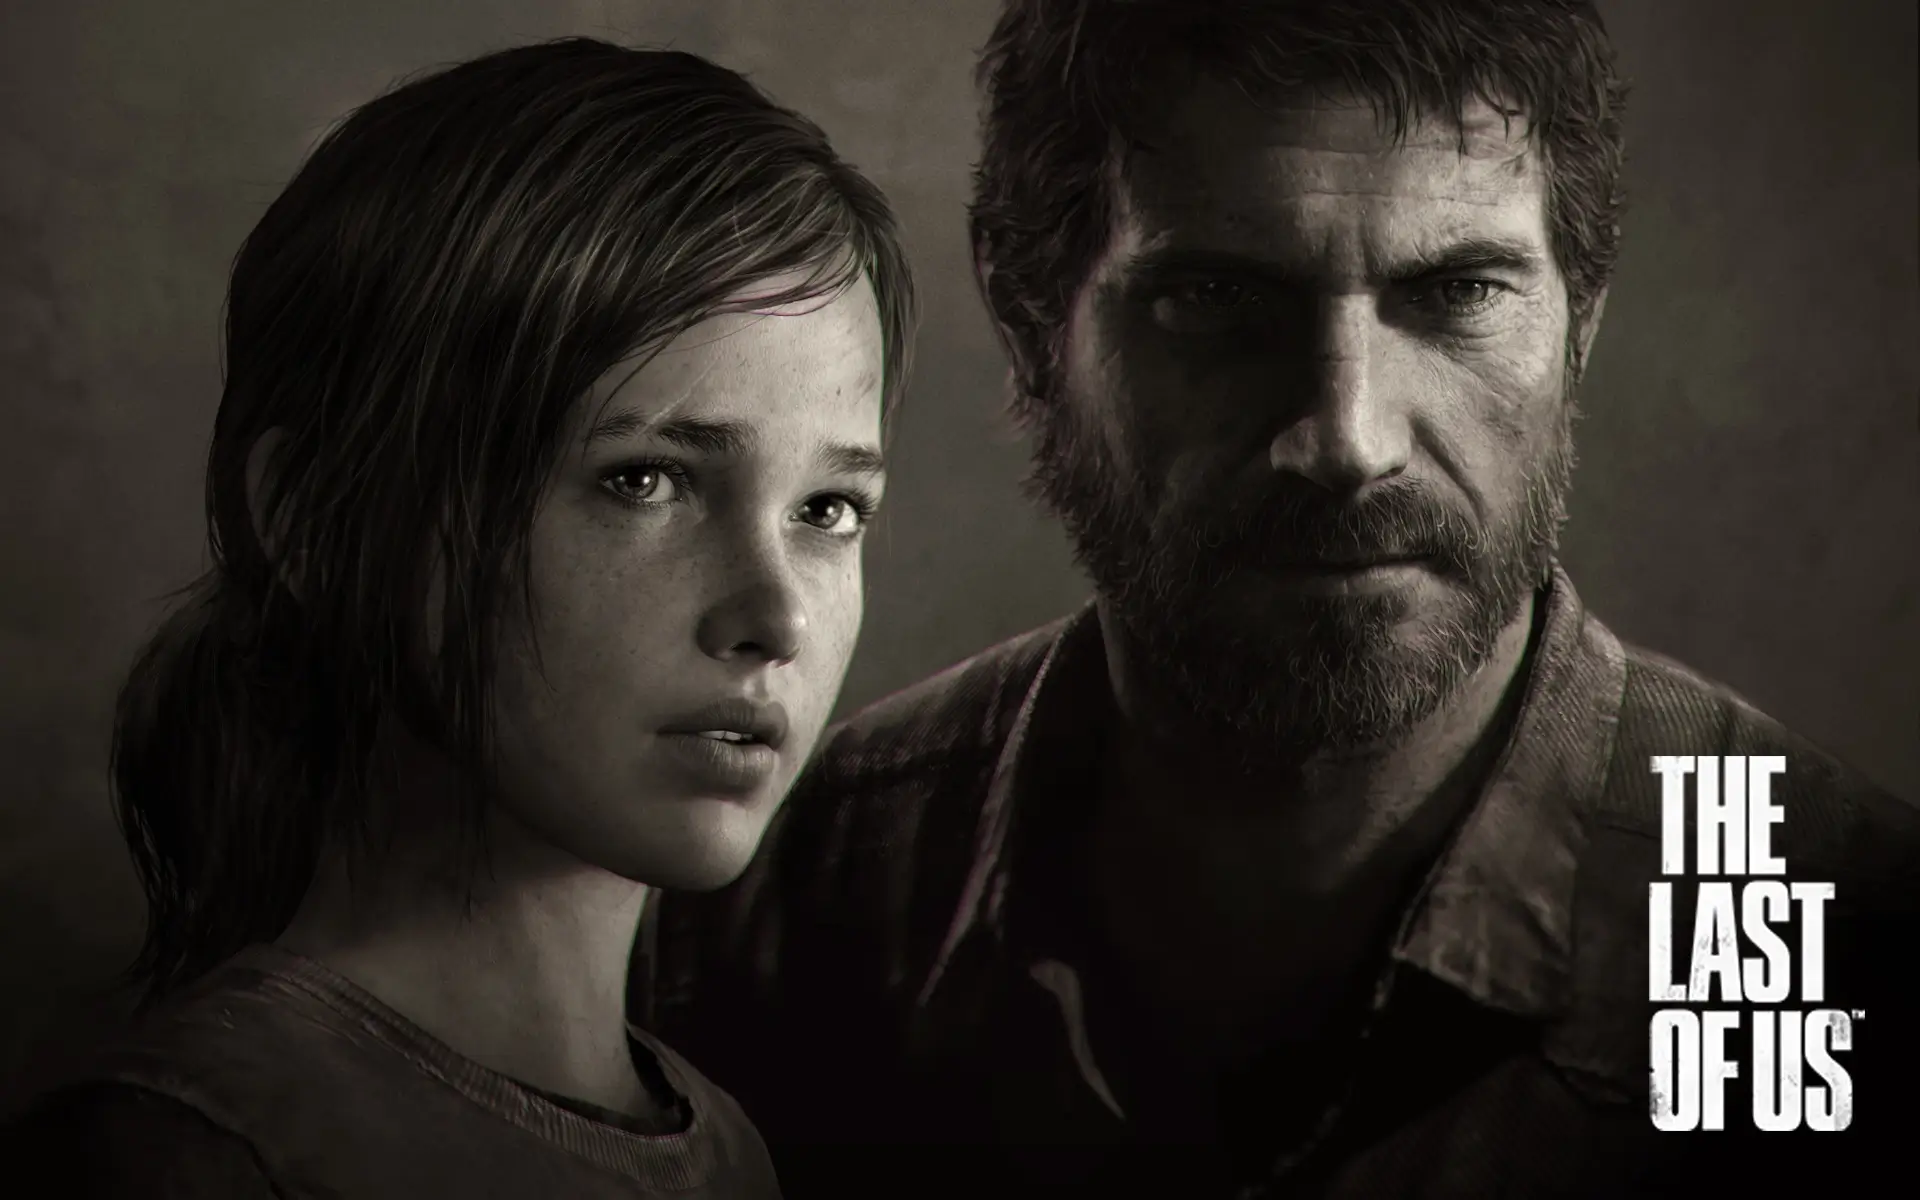 The Last of Us: A Retrospective on the hylled Game and Series